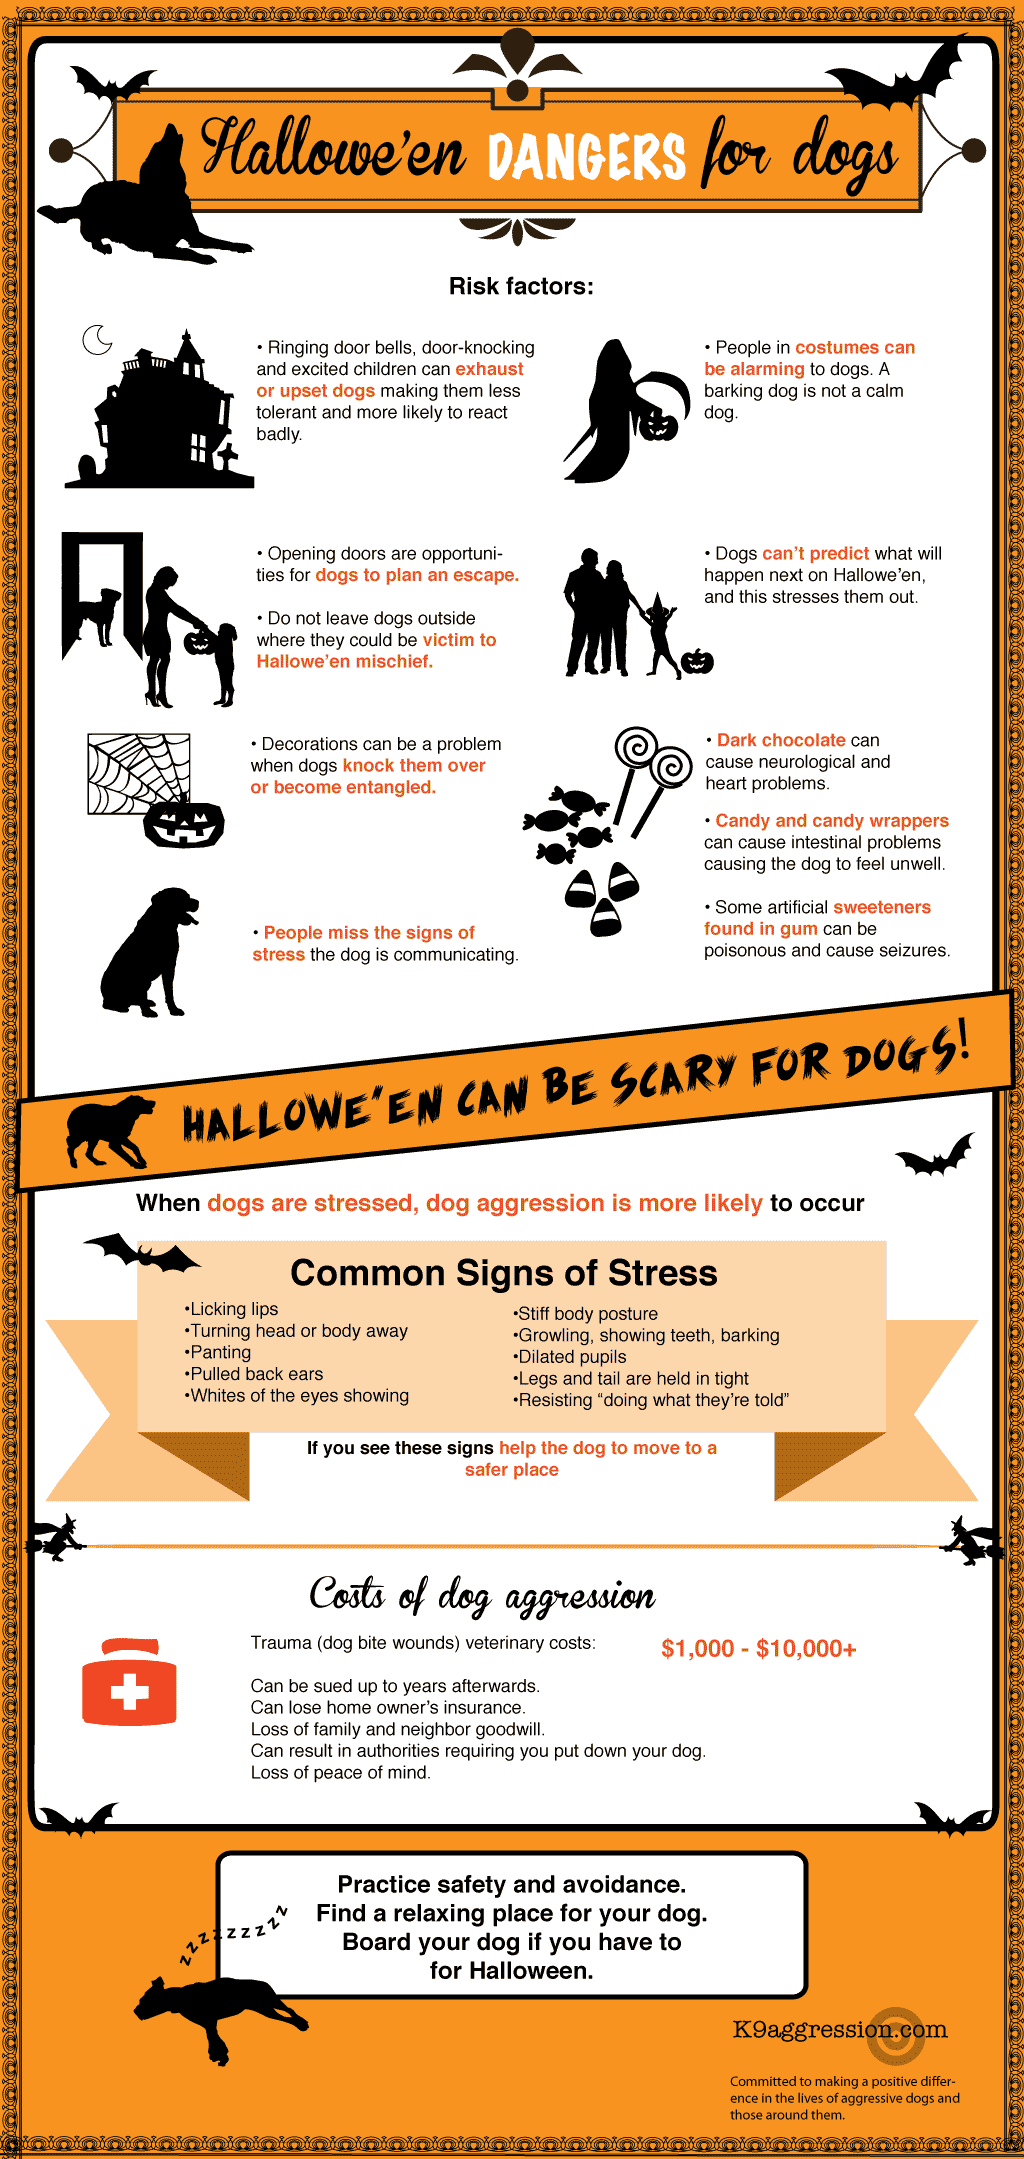 halloween-dangers-for-dogs-infographic2